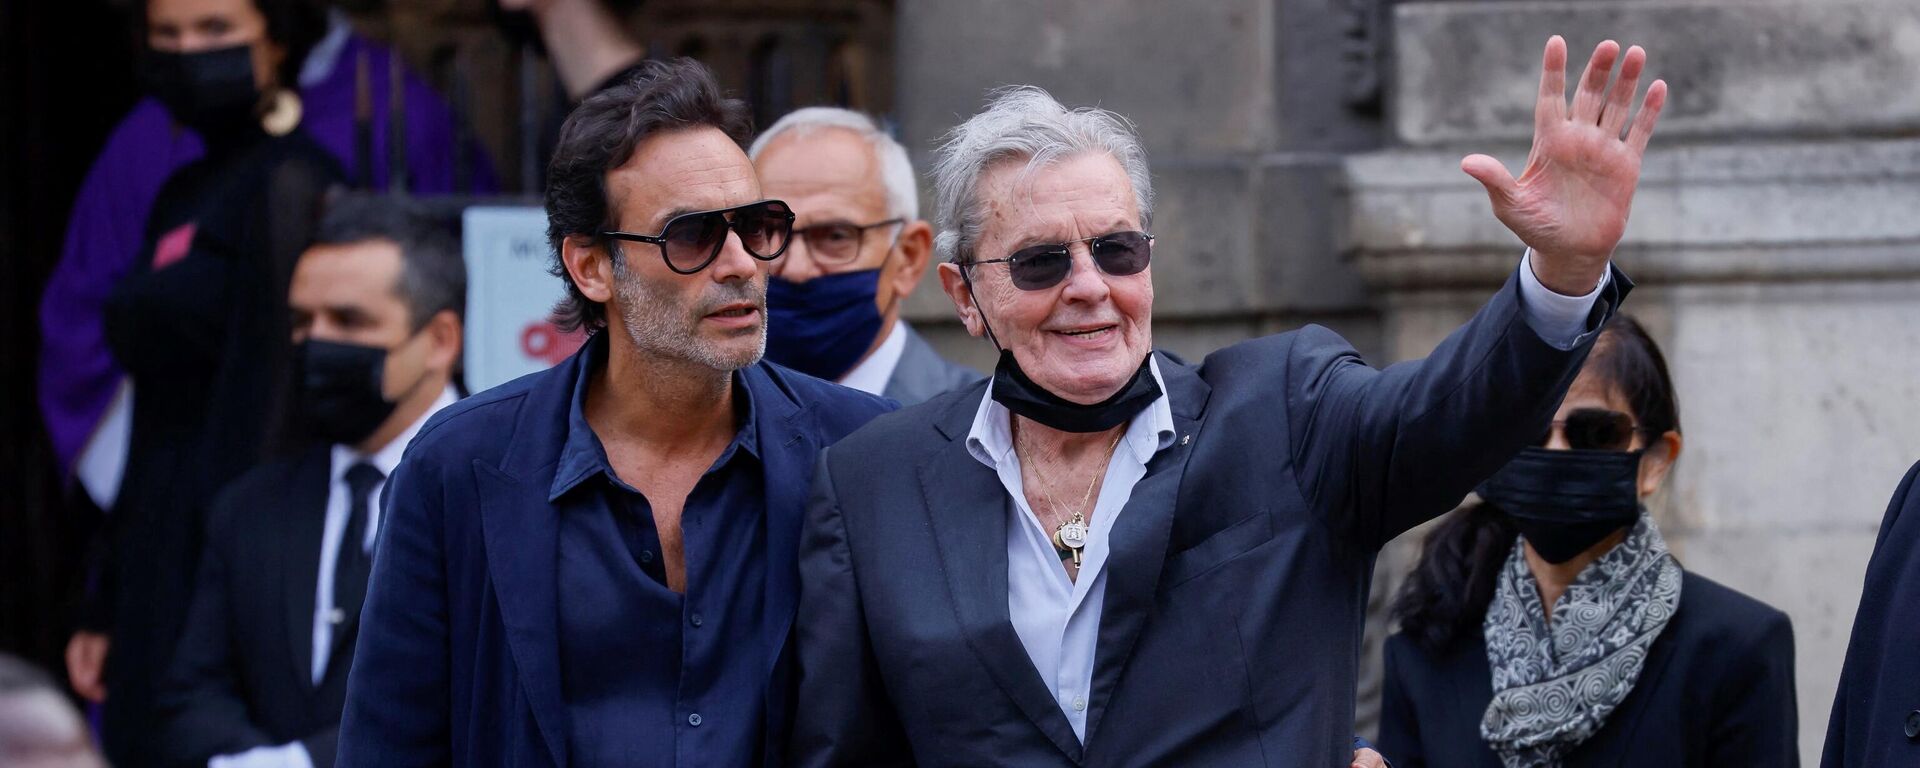 French actor Alain Delon (R) his son Anthony Delon arrives for the funeral ceremony for late French actor Jean-Paul Belmondo at the Saint-Germain-des-Pres church in Paris on September 10, 2021 - Sputnik International, 1920, 18.03.2022